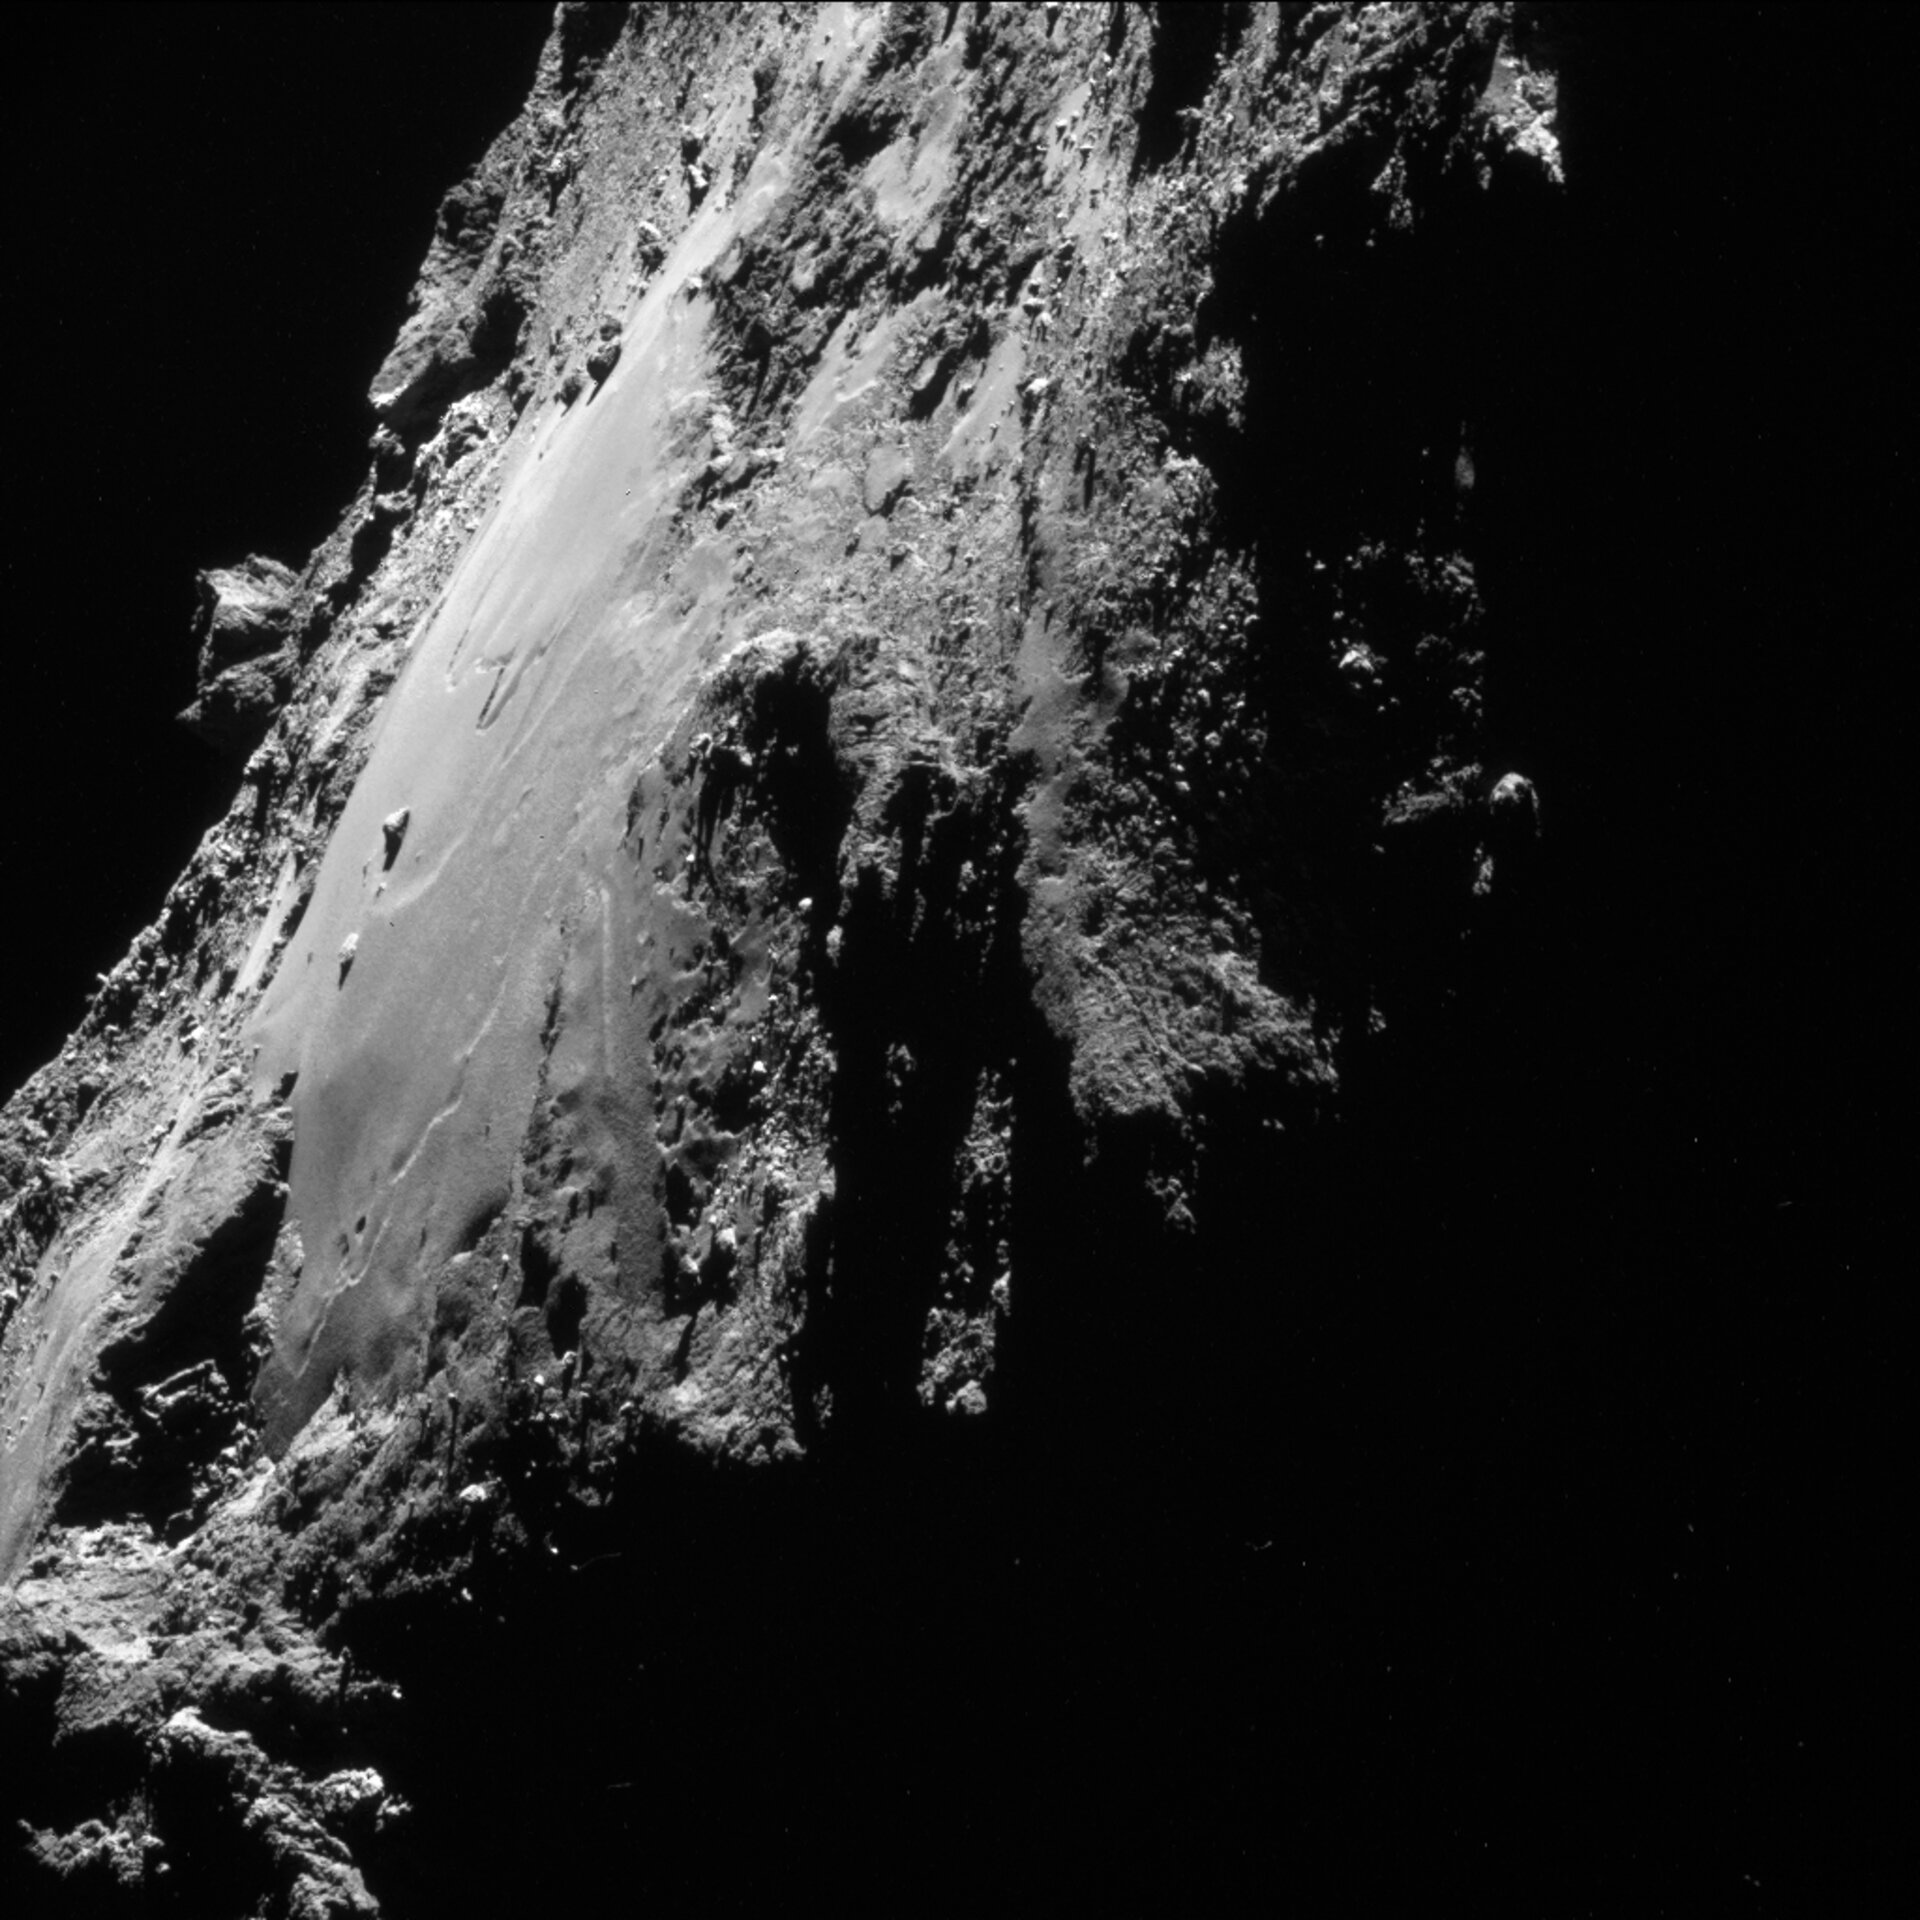 Year at a comet, October 2014